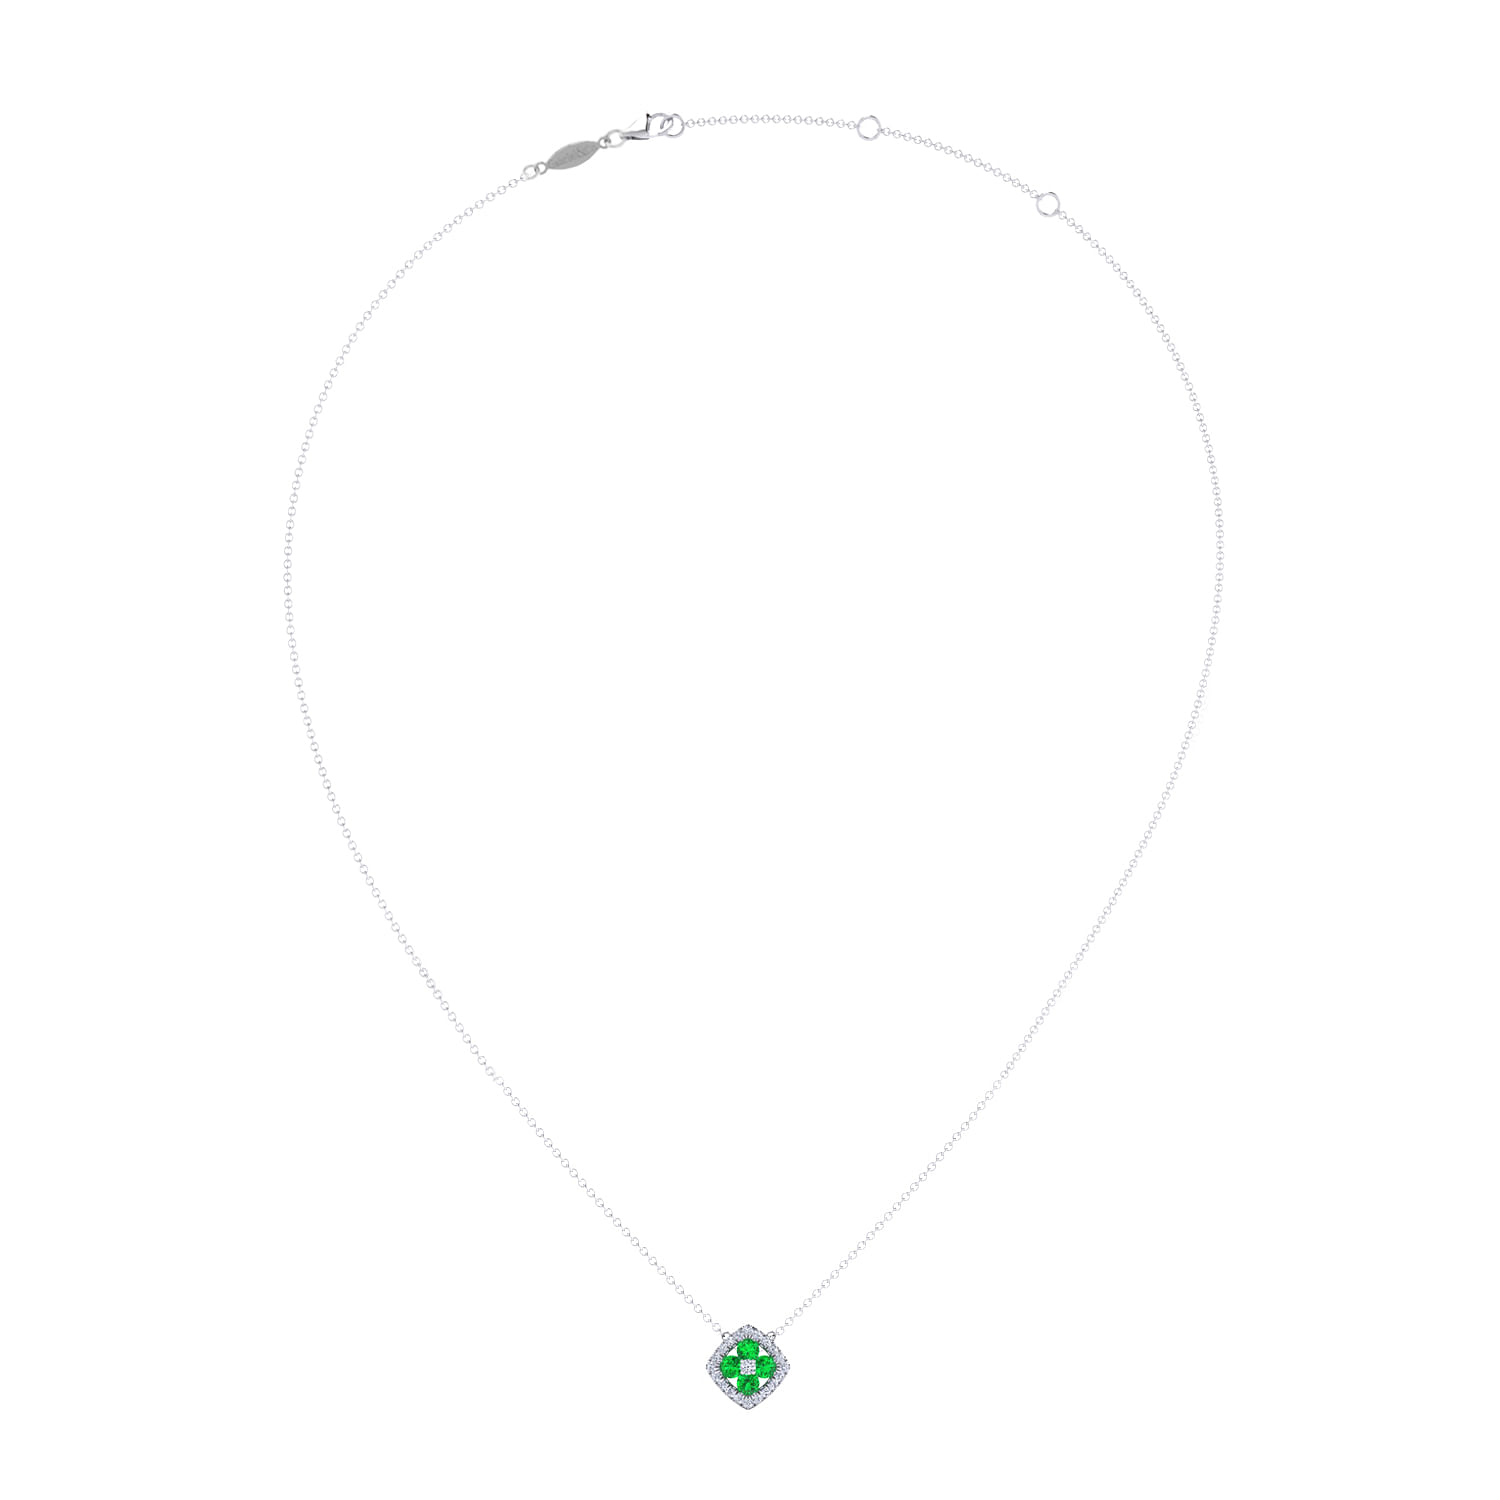 14K White Gold Emerald and Diamond Halo Floral Pendant Necklace